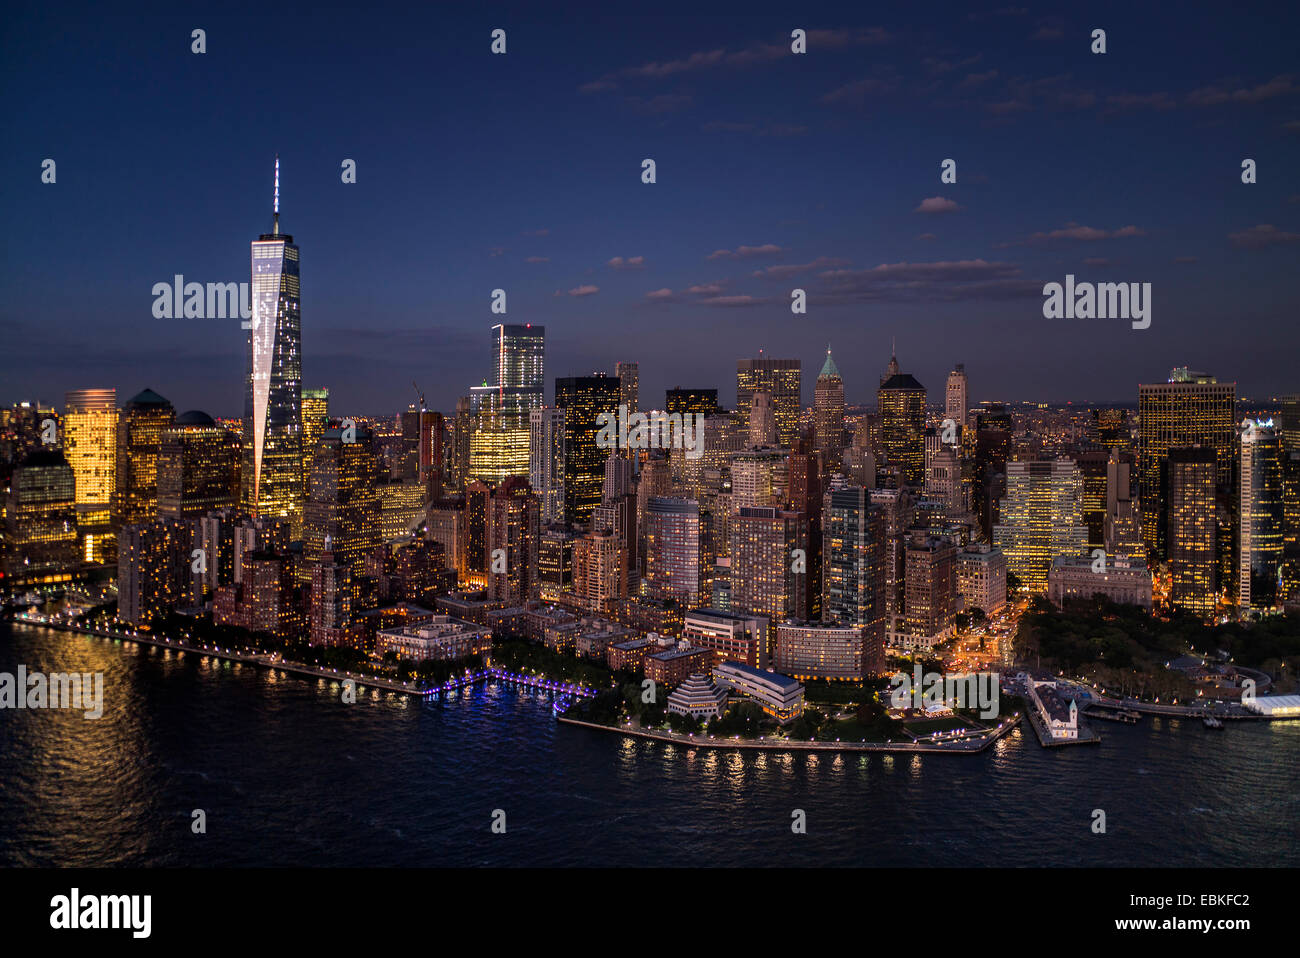 USA, New York State, New York City, Aerial view of city with Freedom tower at night Stock Photo